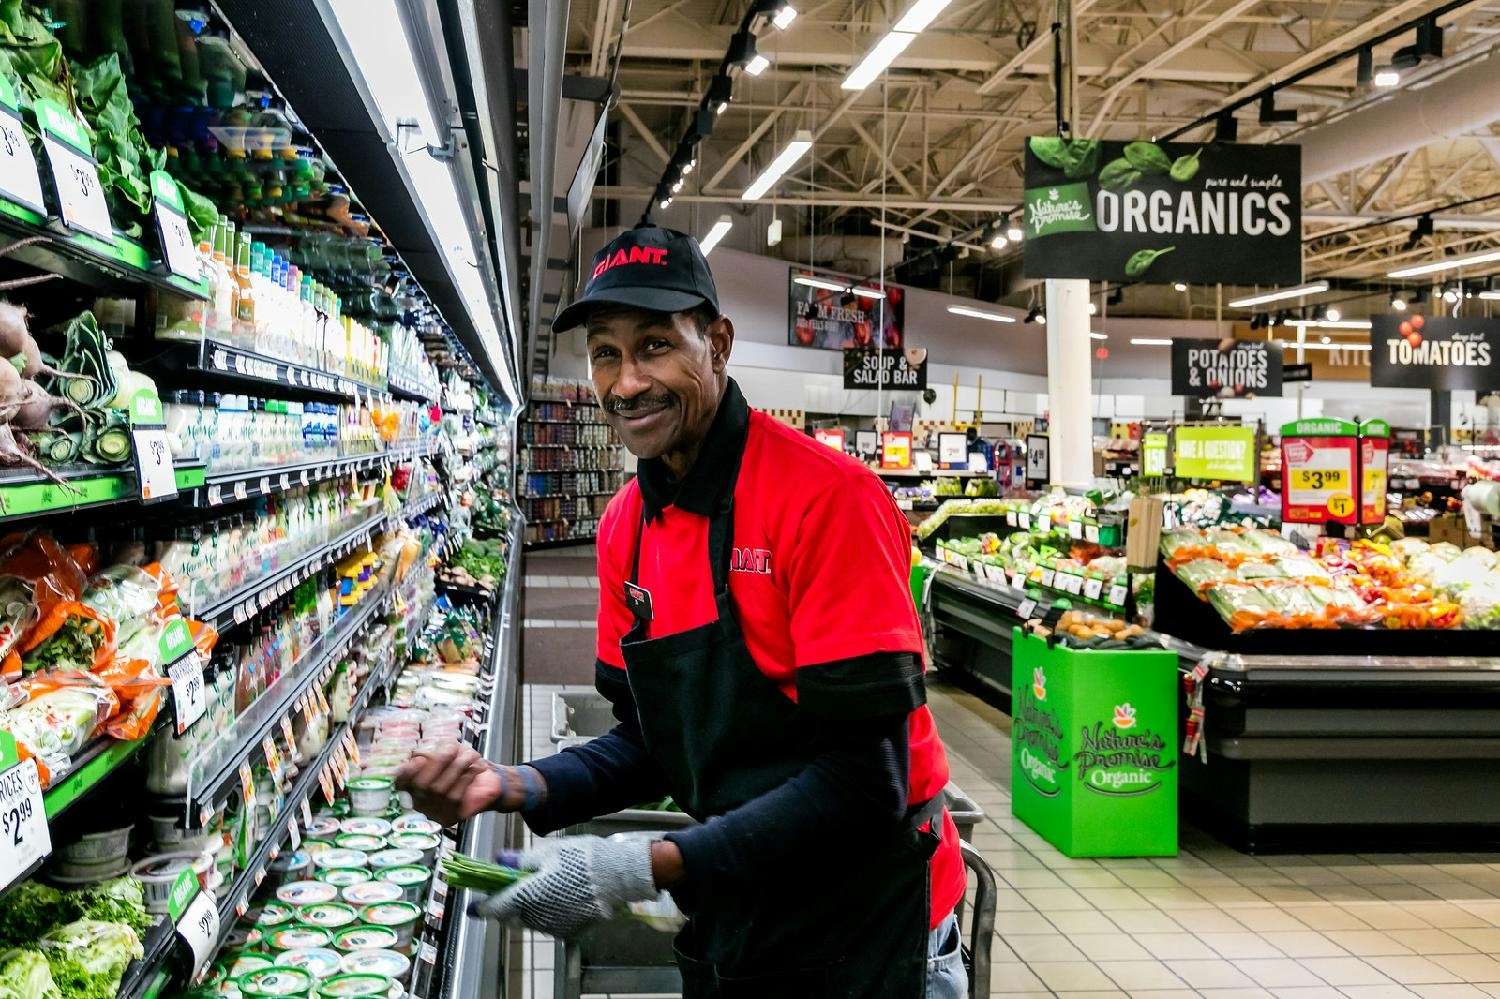 The GIANT Company produce team member, ensuring the shelves are stocked and ready for customers.